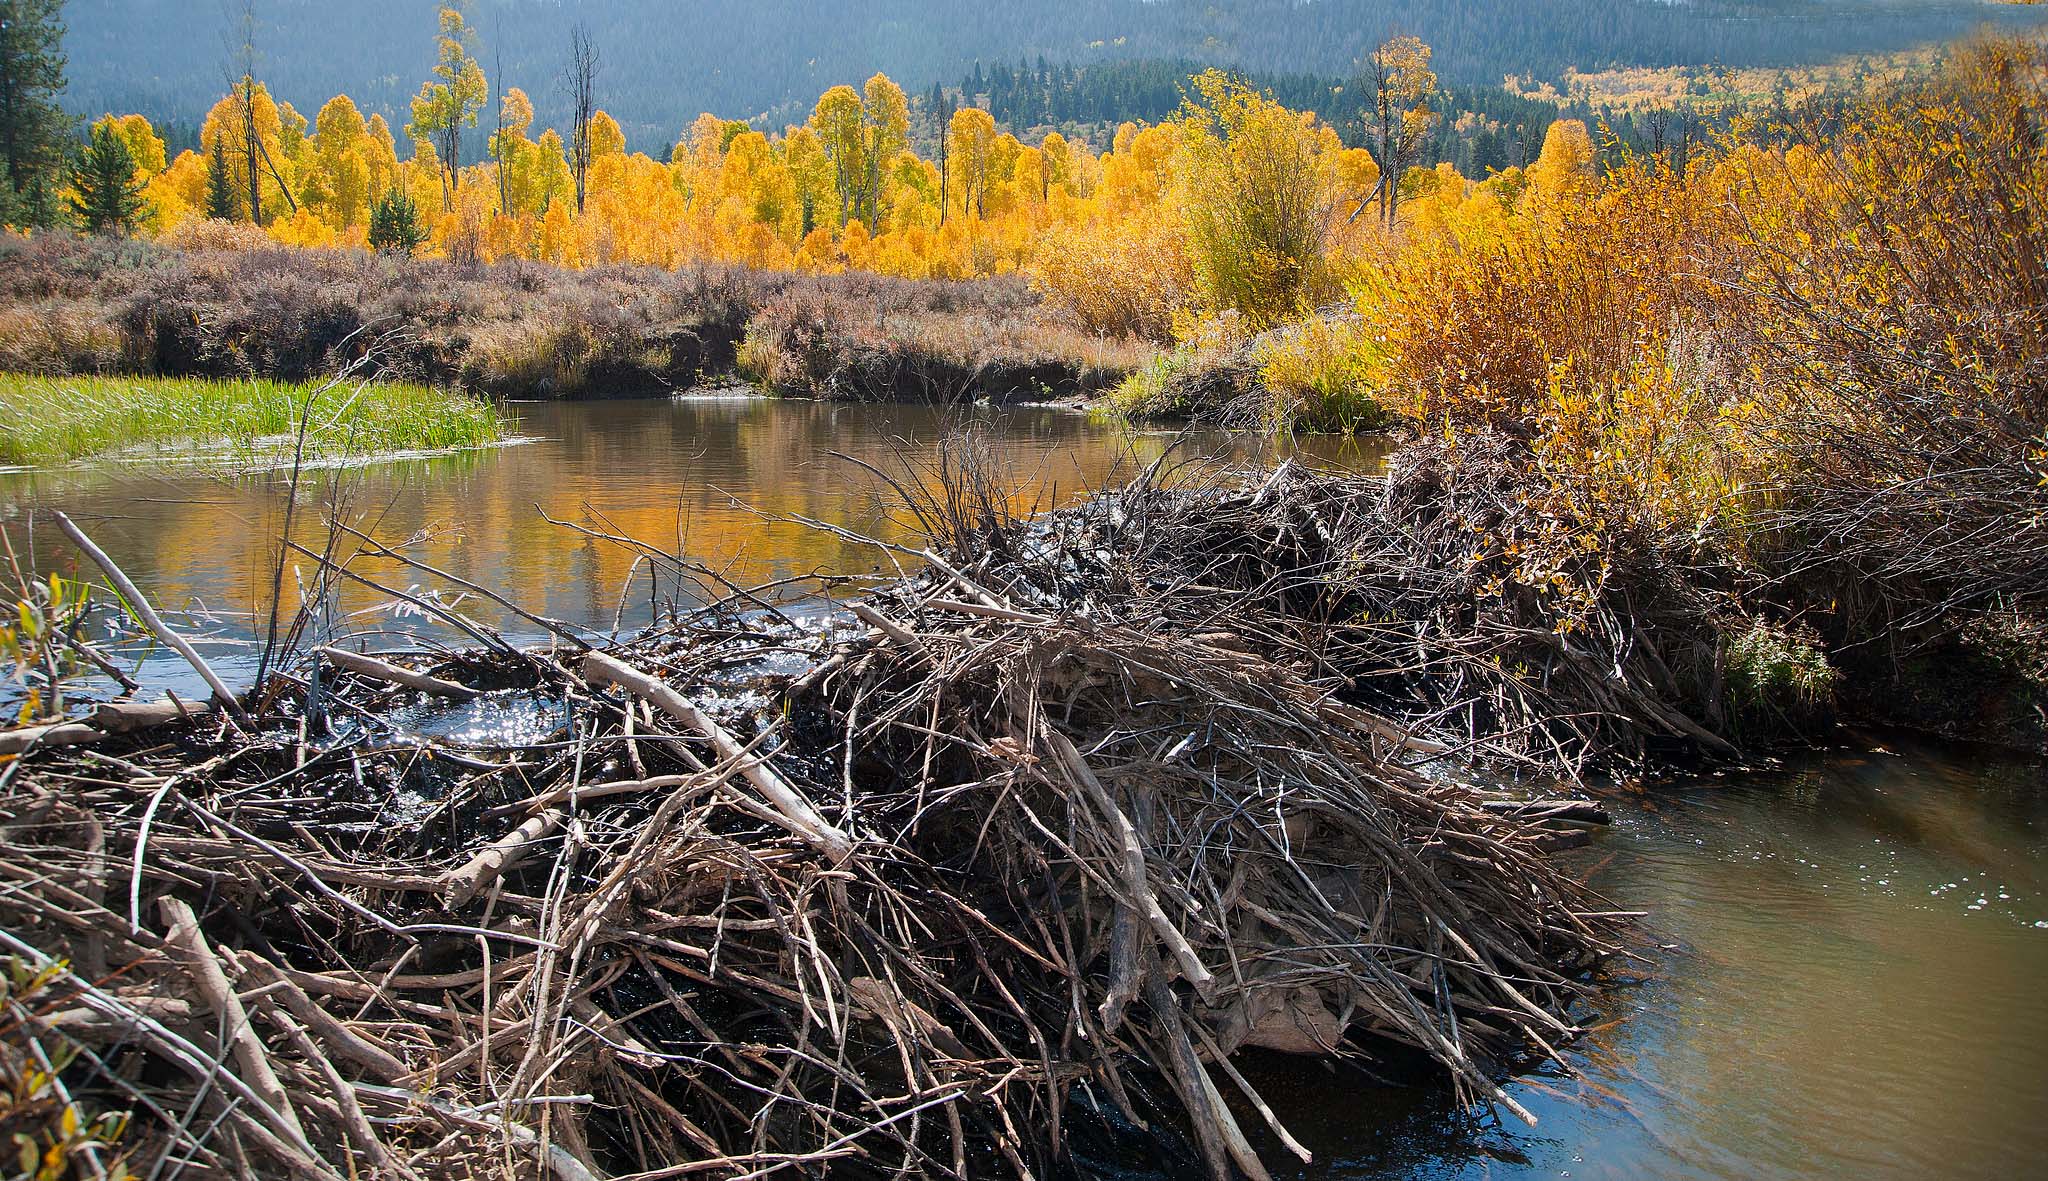 A beaver dam and pond with yellow trees in the background